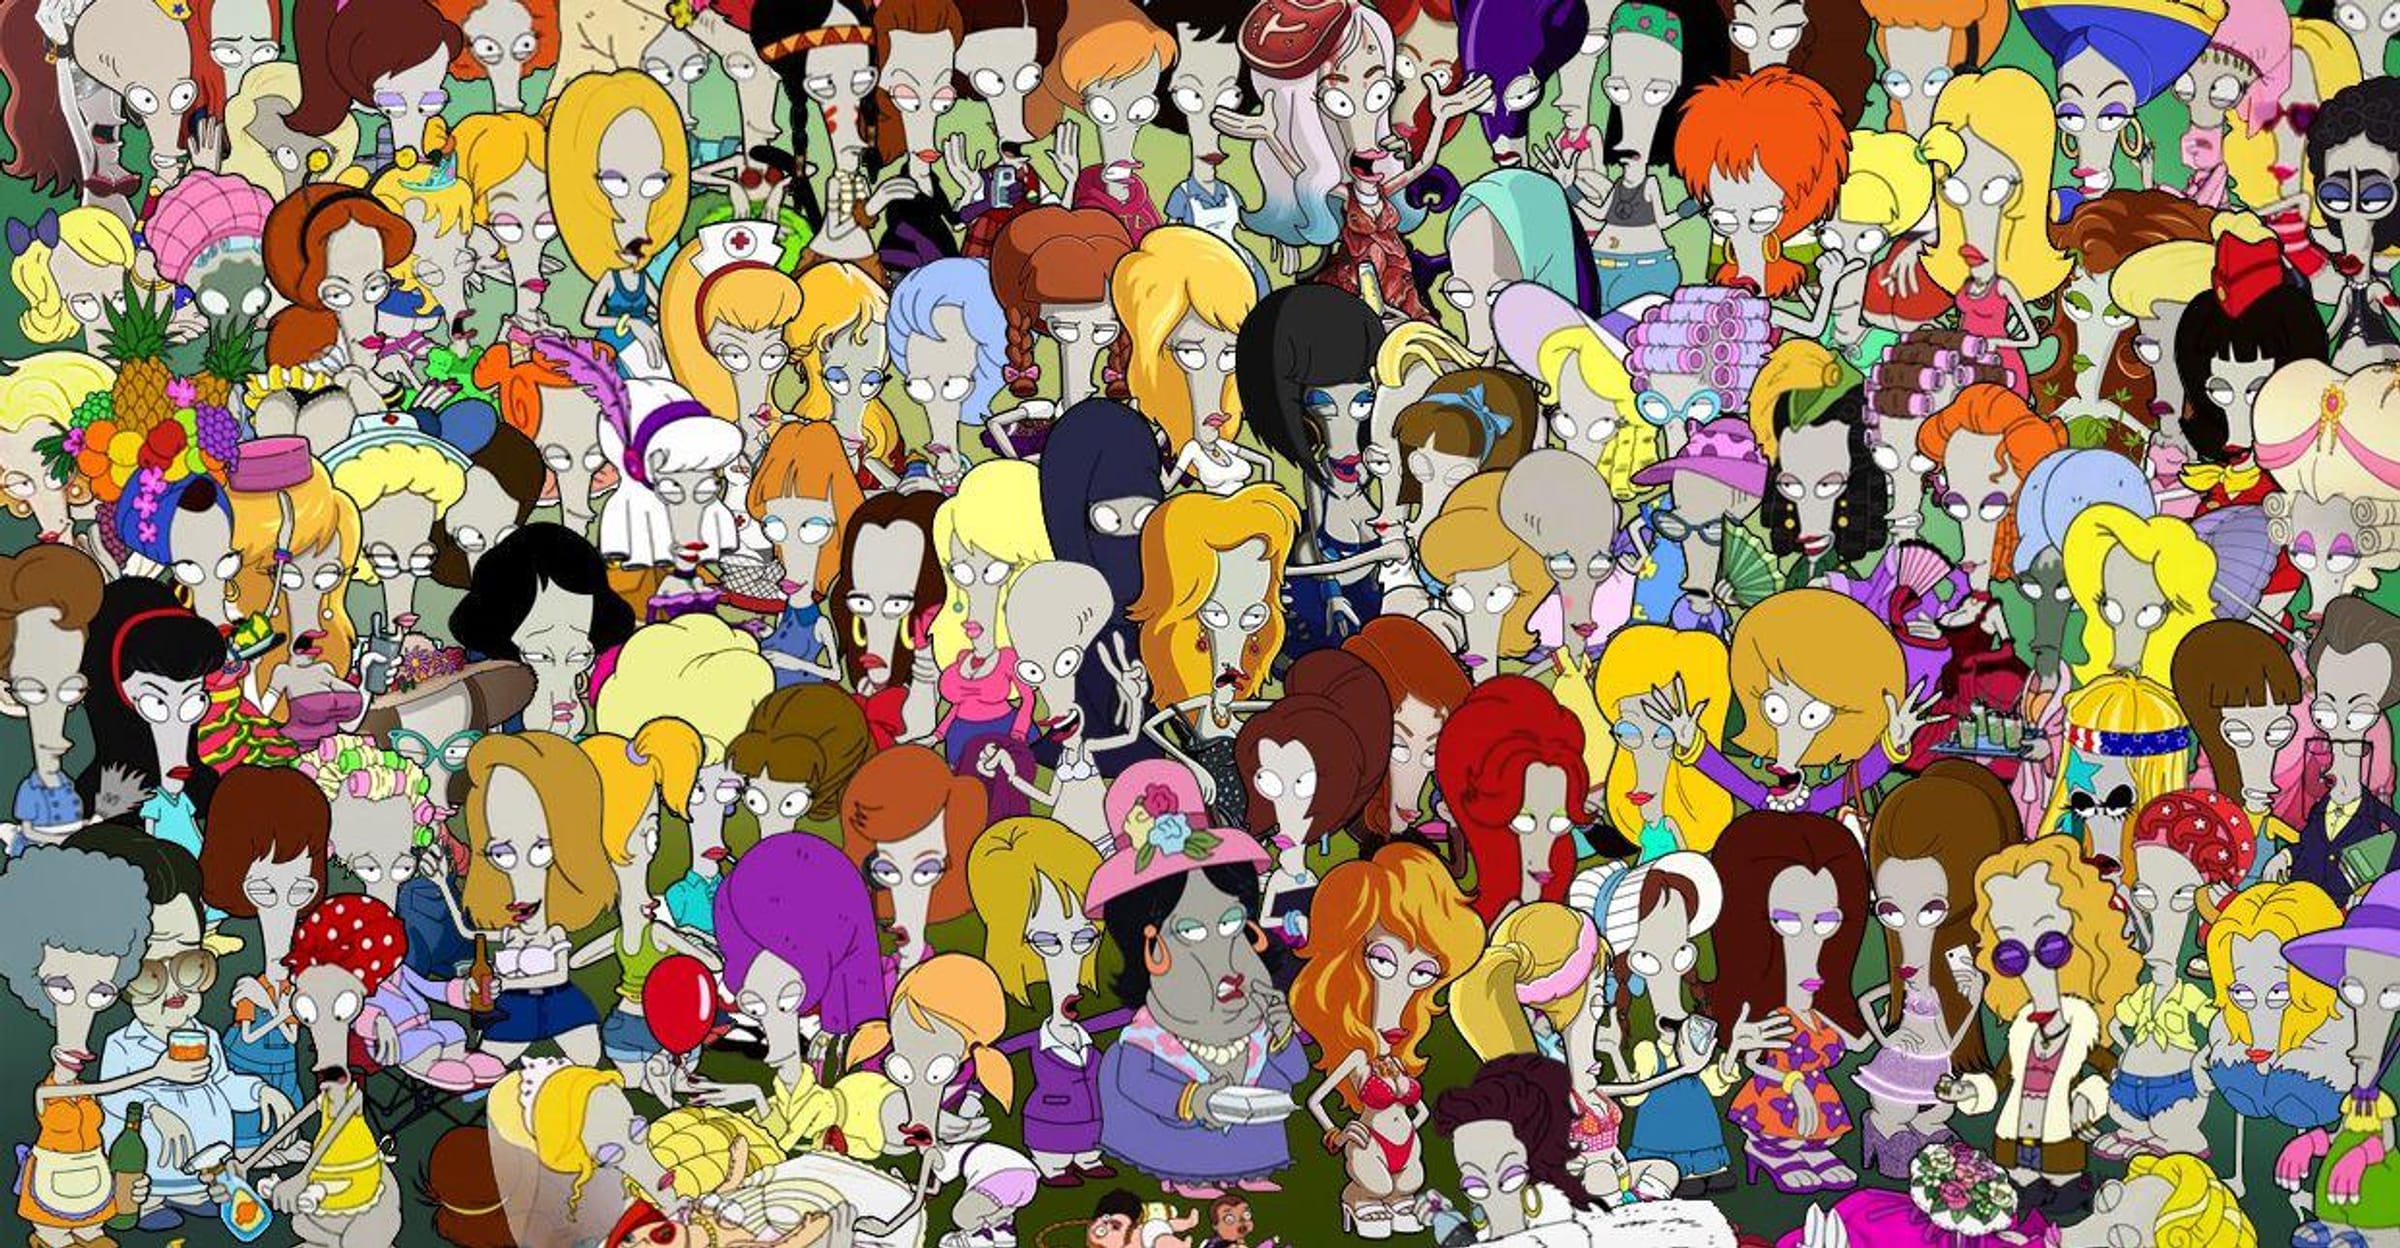 Meet the Characters in 'American Dad!